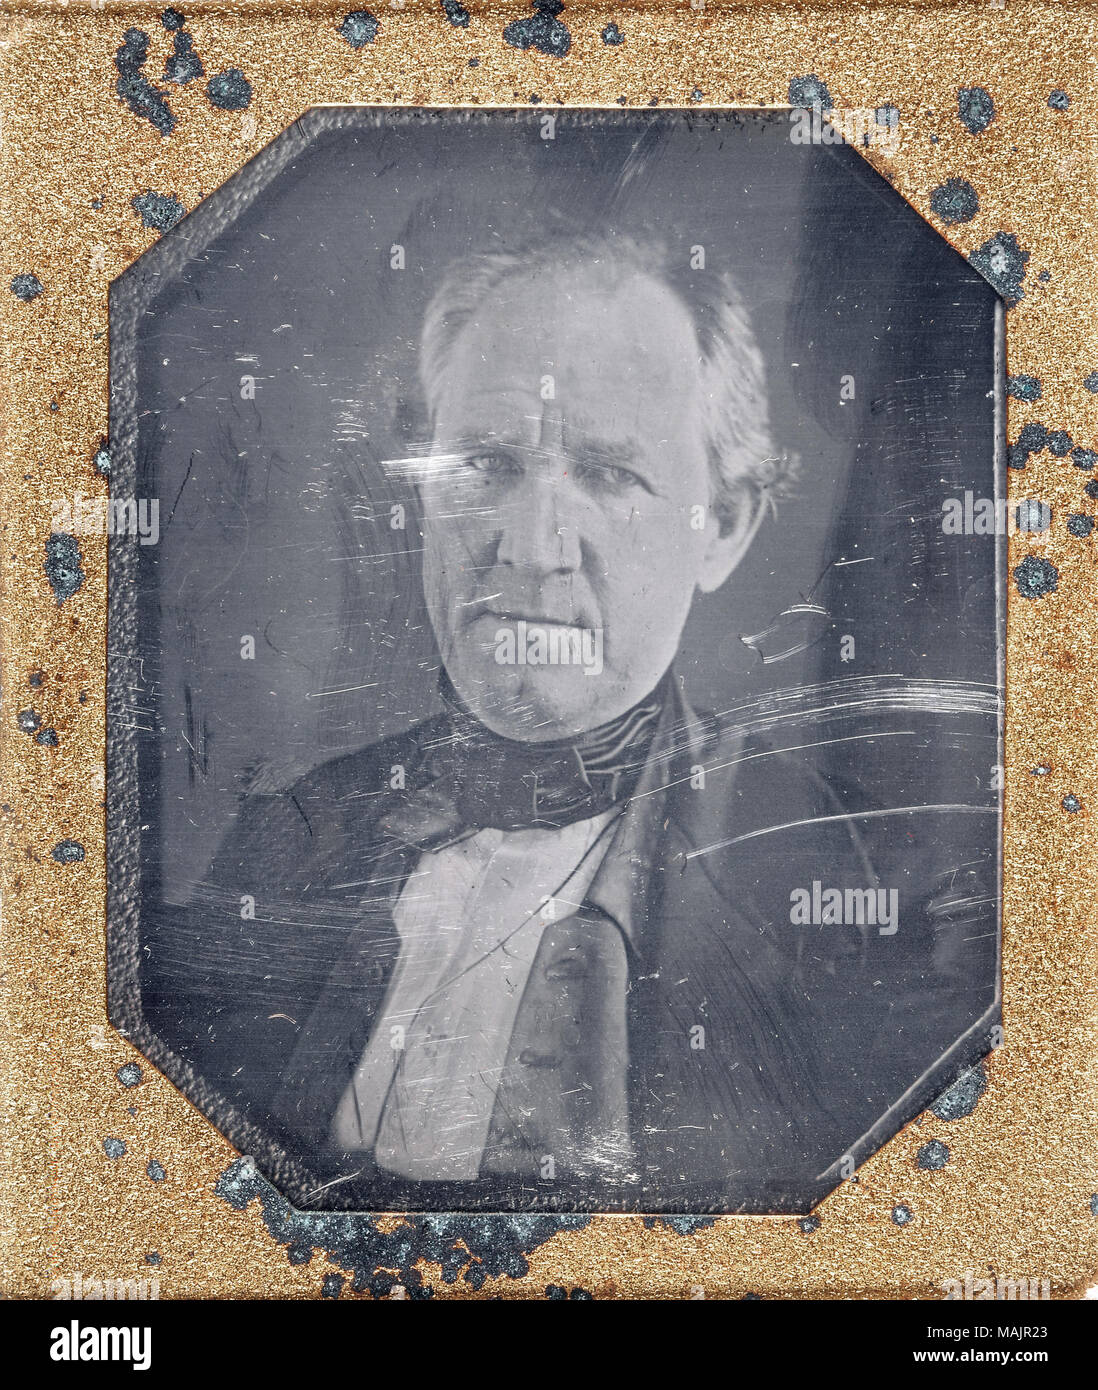 Portrait of Sam Houston. This is a copy daguerreotype. Houston served in the War of 1812 and was governor of both Tennessee and Texas, making him the only person in United States history to be a governor of two separate states. The city of Houston, Texas is named after him. The daguerreotype is in its original case. Title: Sam Houston.  . 1851. Thomas M. Easterly Stock Photo